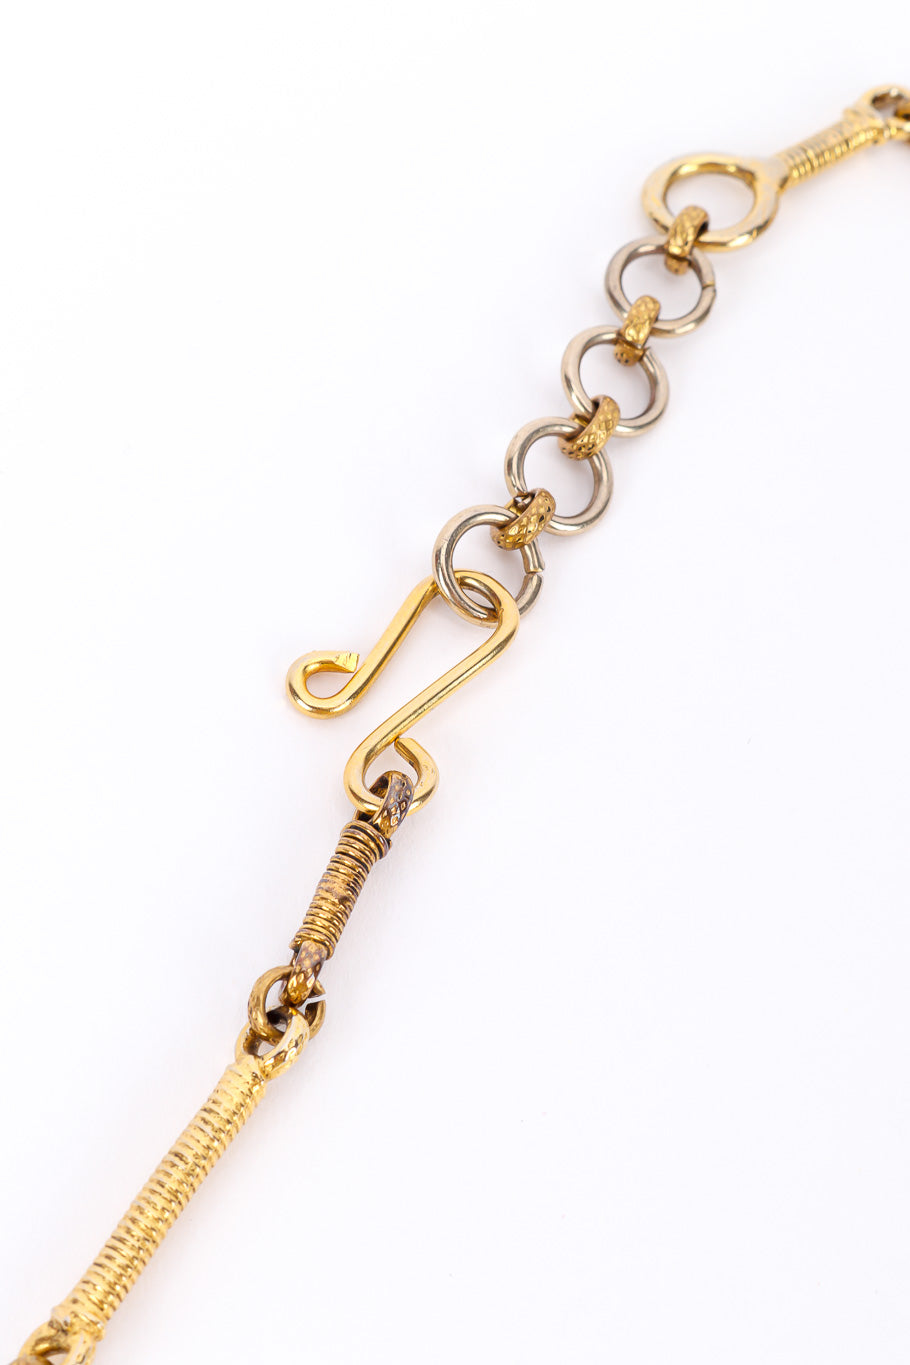 Gripoix stone necklace by Chacok on white background hook and extender chain @recessla